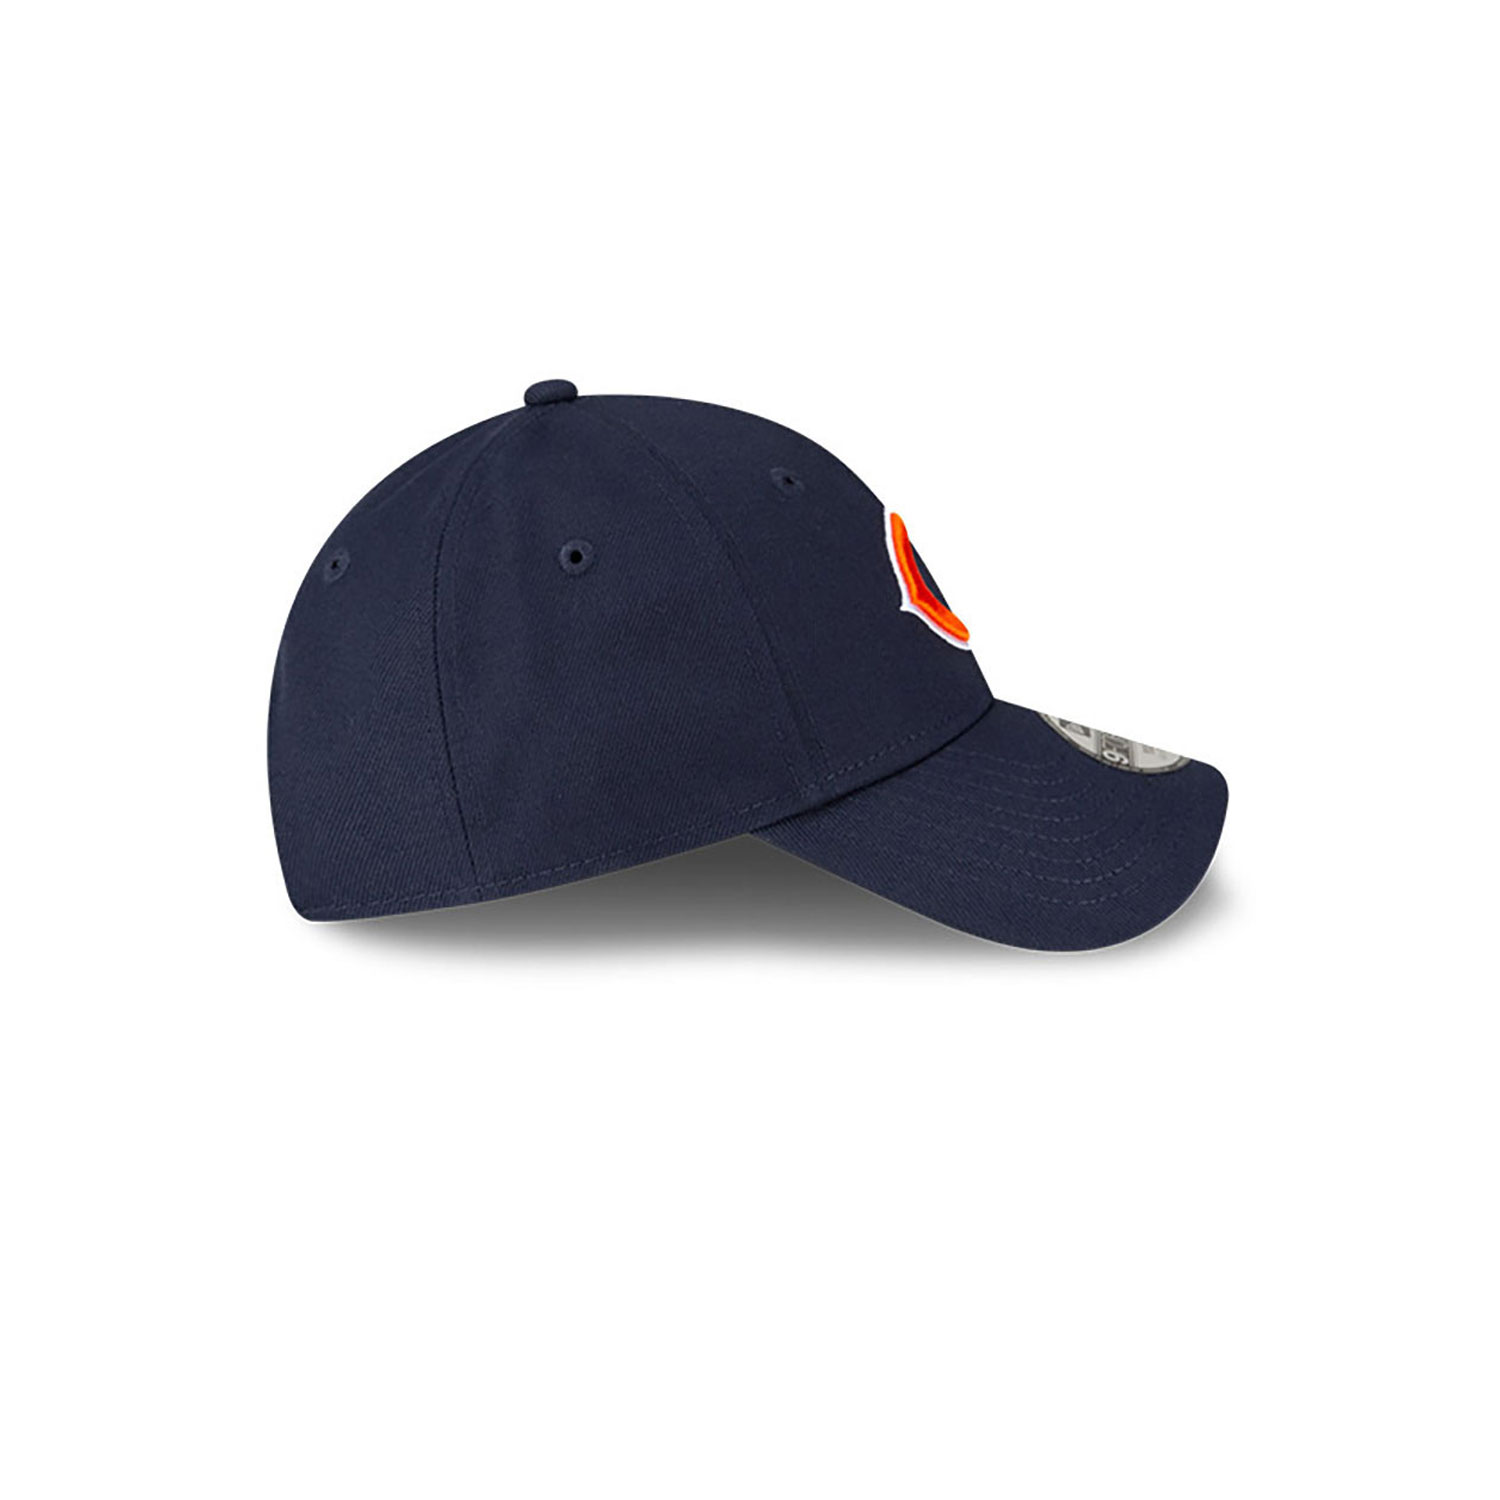 Chicago Bears Youth The League Navy 9FORTY Adjustable Cap